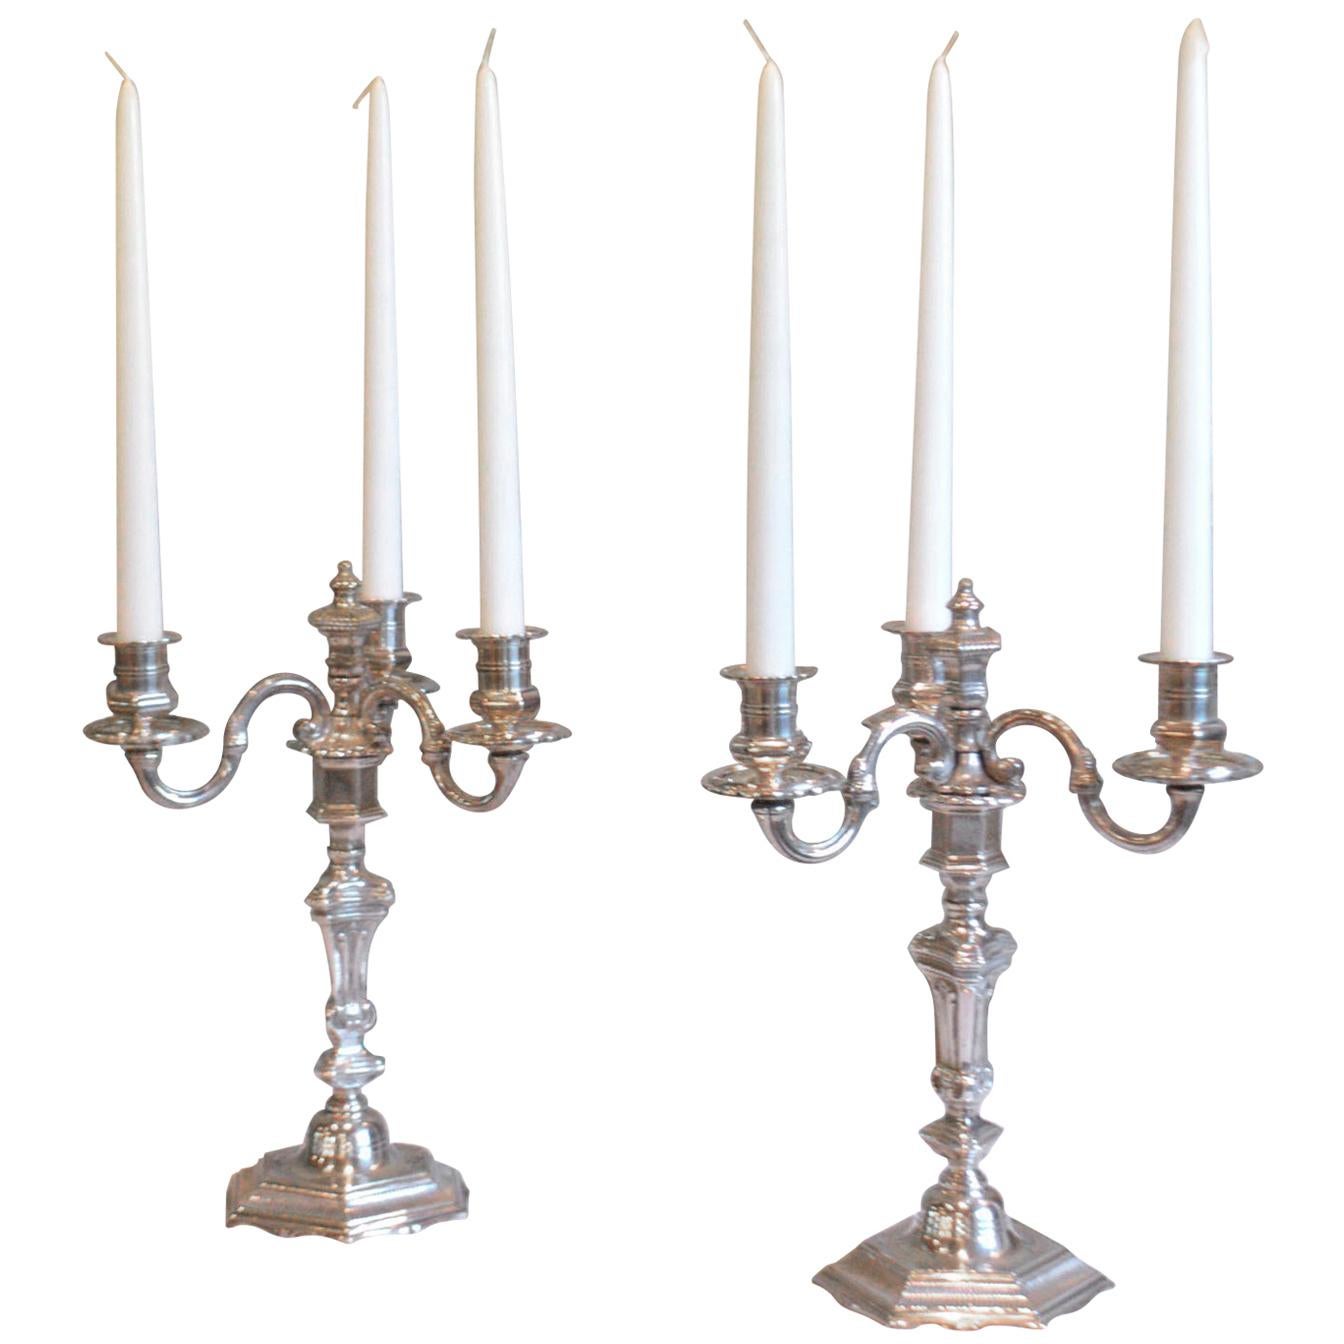 Pair of Silver Plated Bronze Candelabras, converts to Single Candlesticks